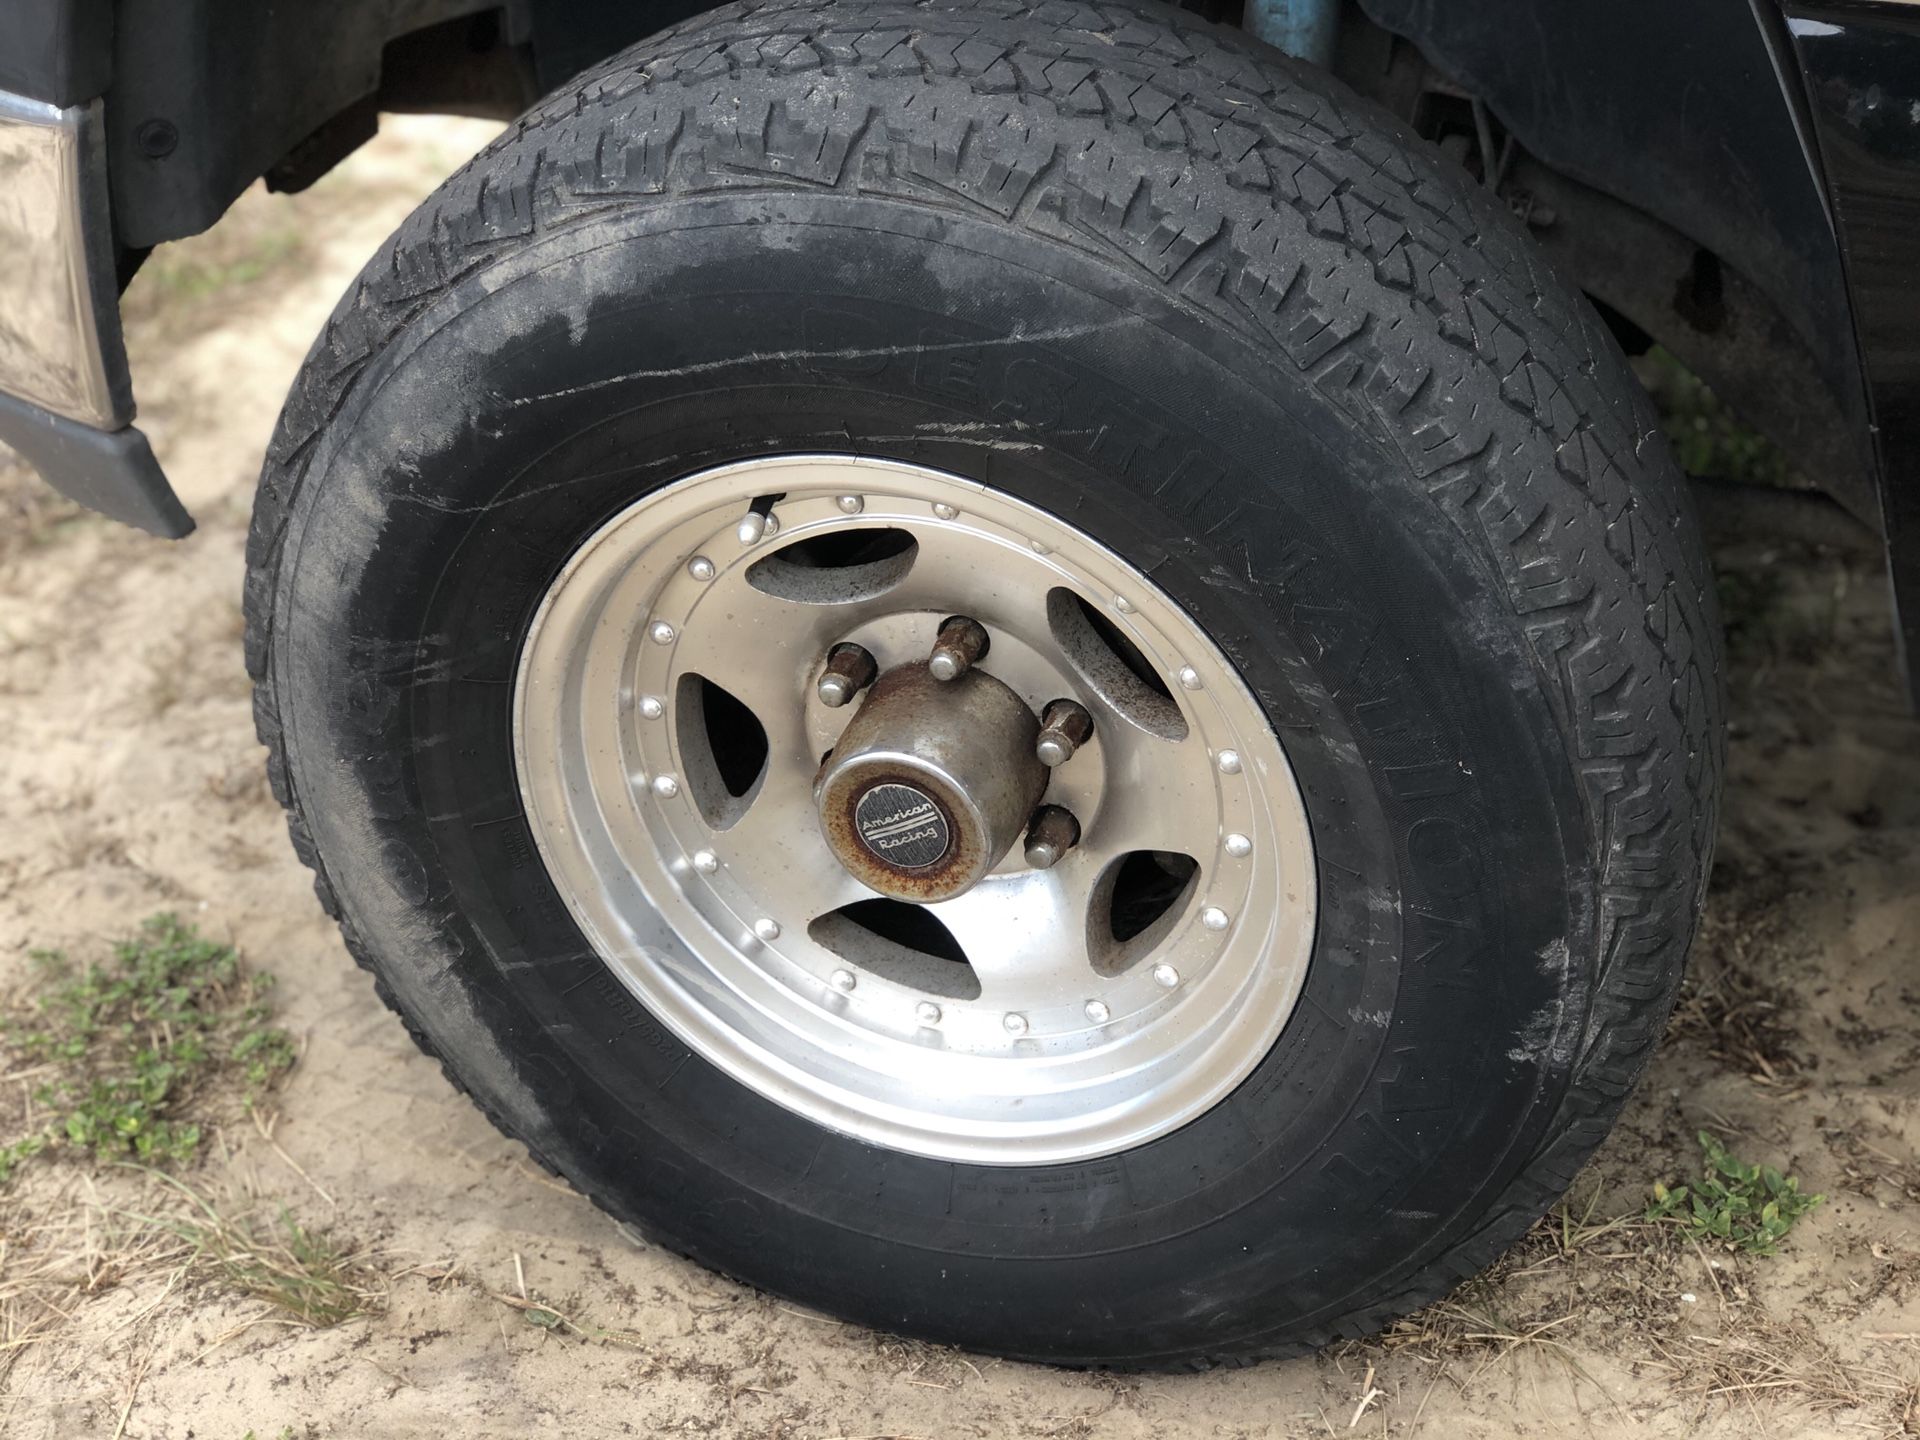 Chevy/GMC 6x5.5 American Racing Wheels and Tires $300 FIRM